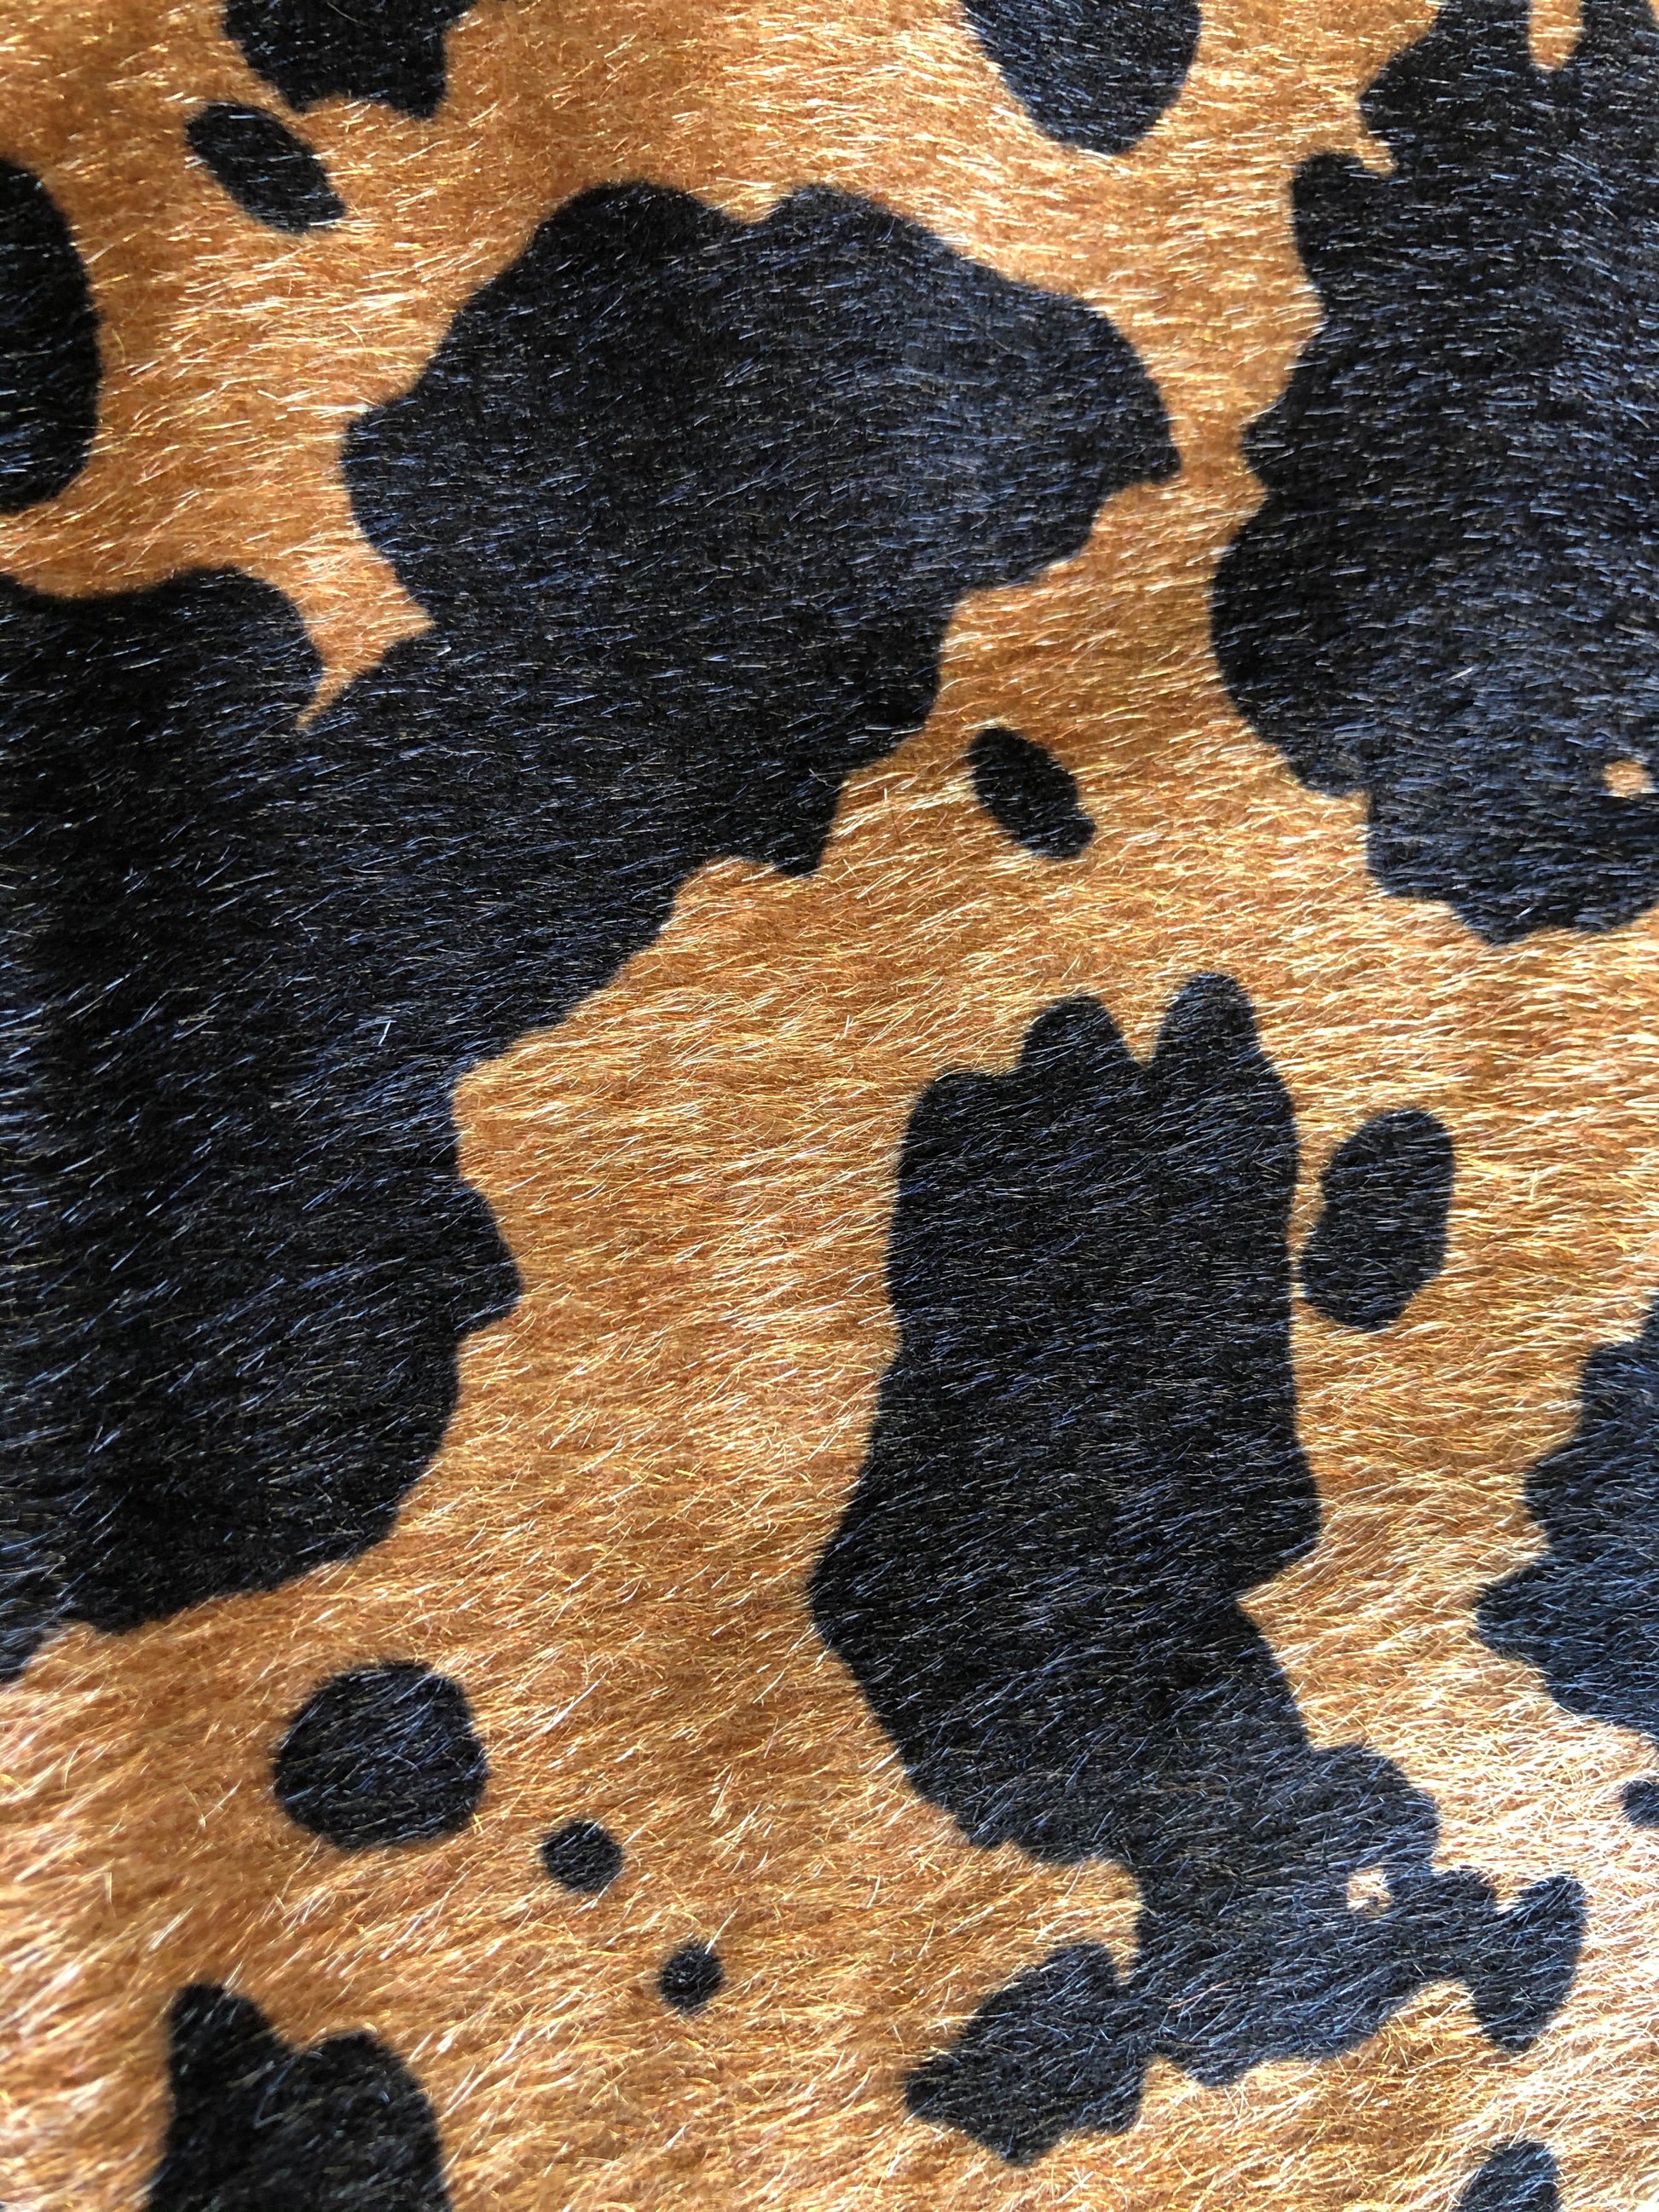 Faux horsehair fabric, Faux cowhide fabric, artificial fur, textured fabric  for bags, garments, home decor